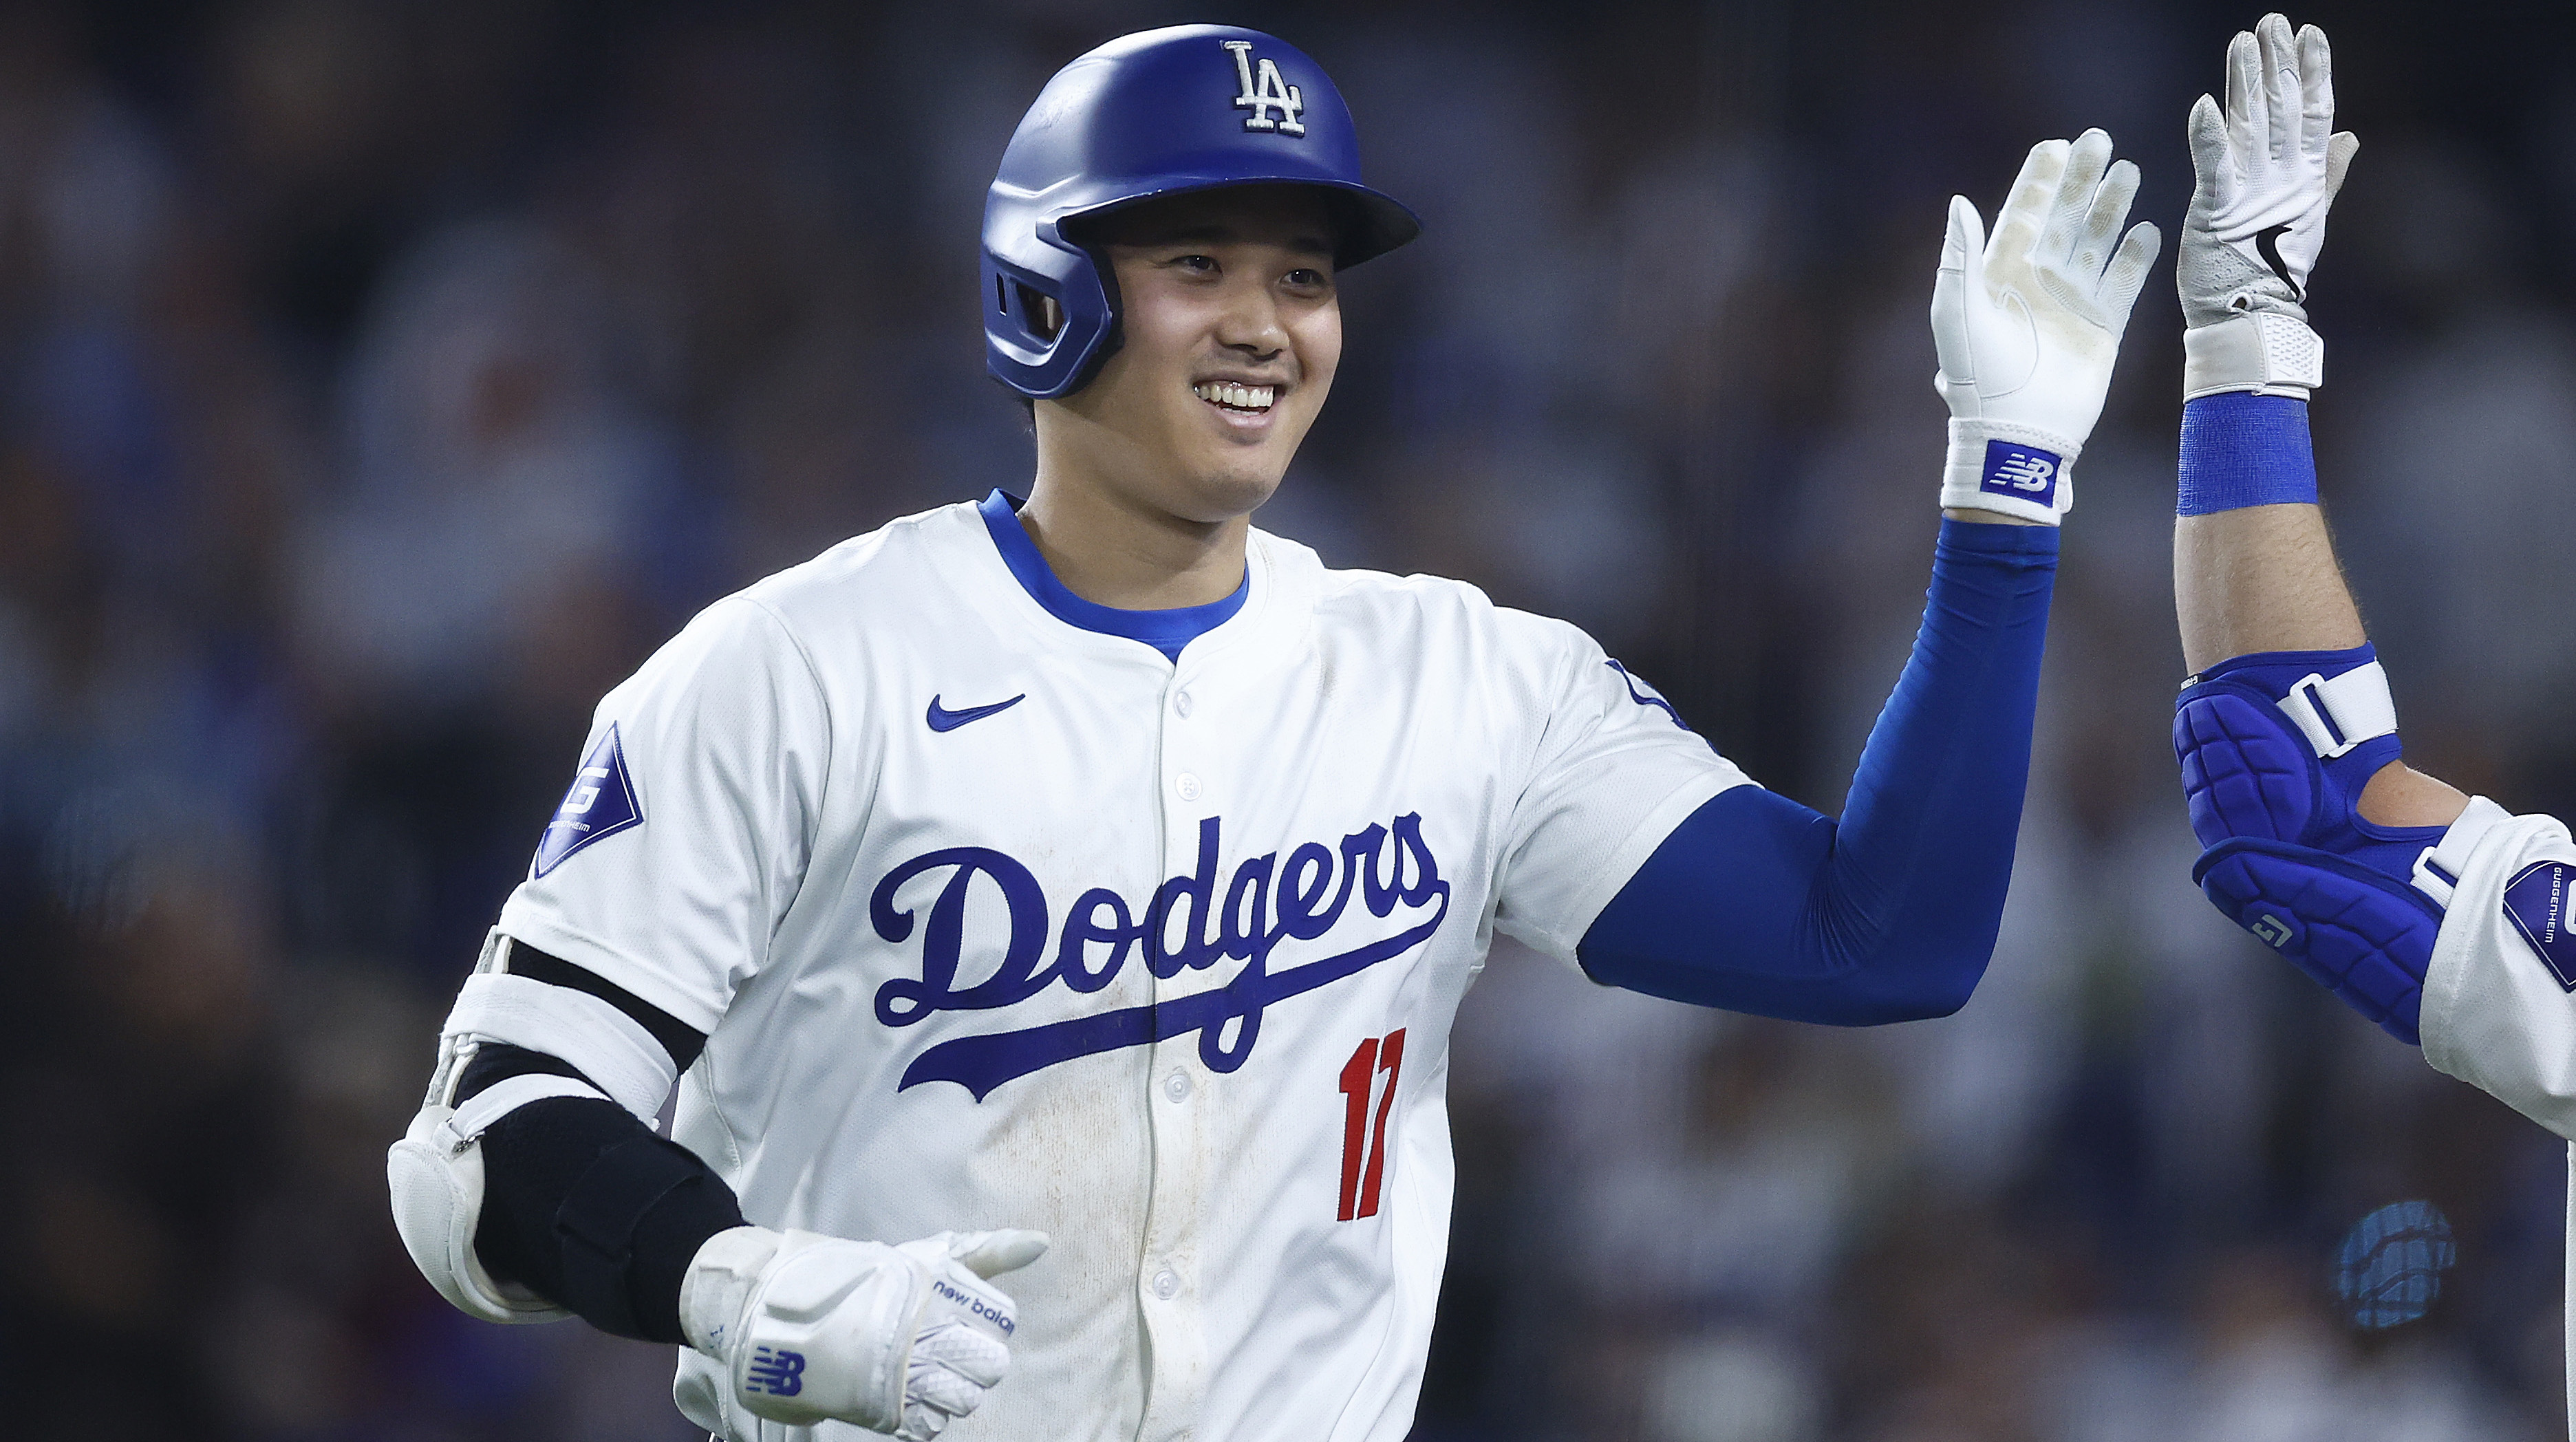 Dodgers Hit 4 HRs in 1 Inning, Win 15-2 🤯